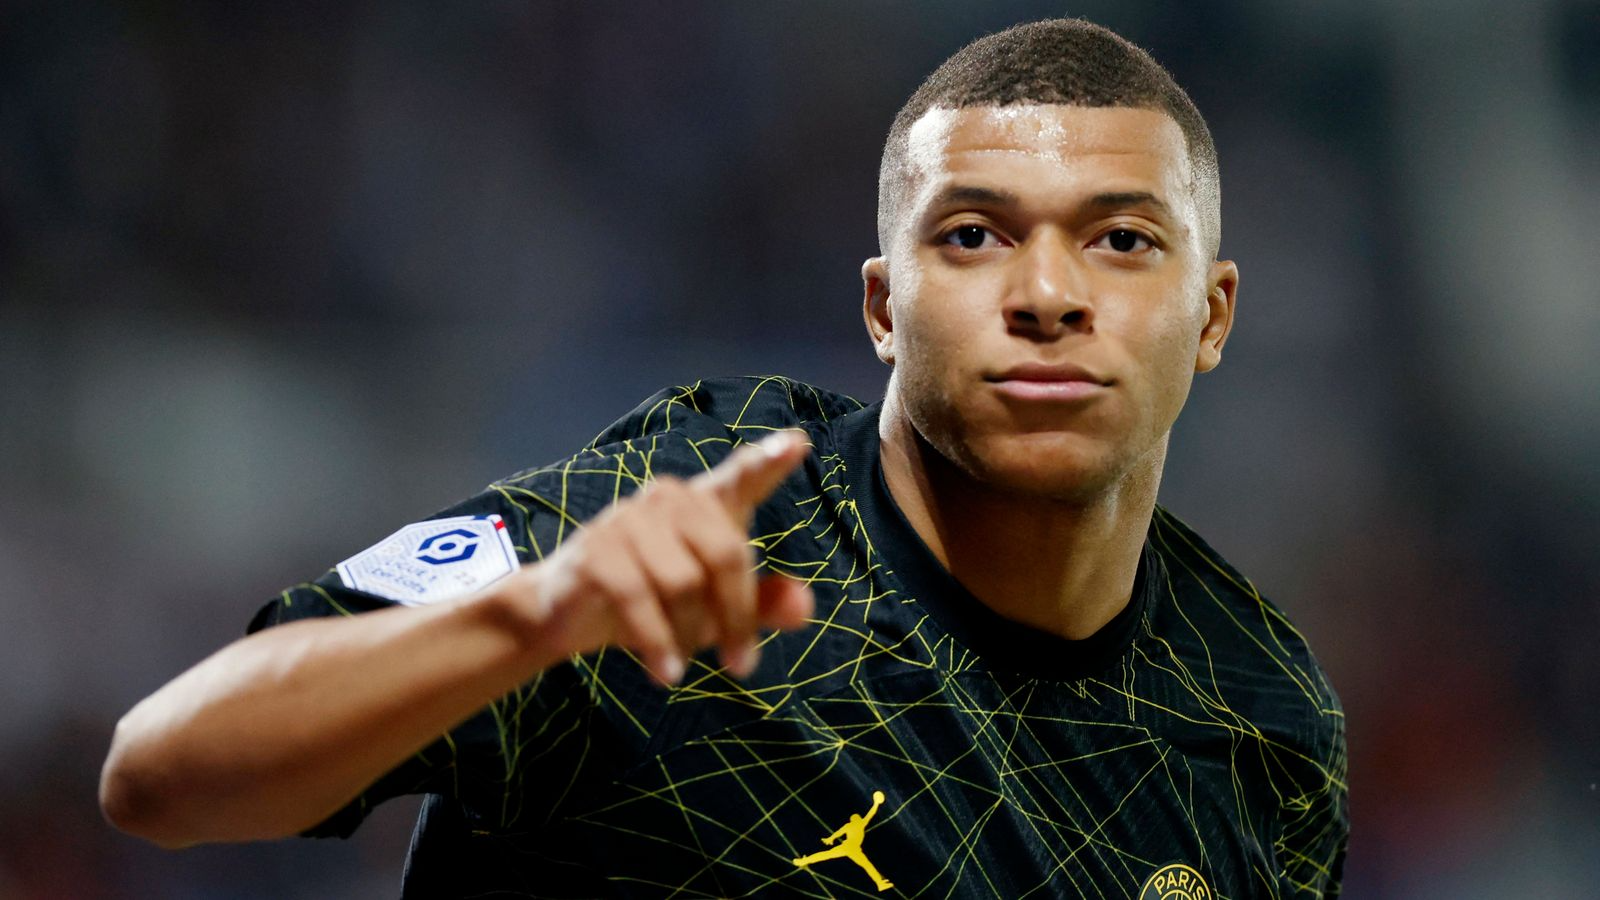 PSG Want To Make Final Offer To Mbappé On Contract Extension